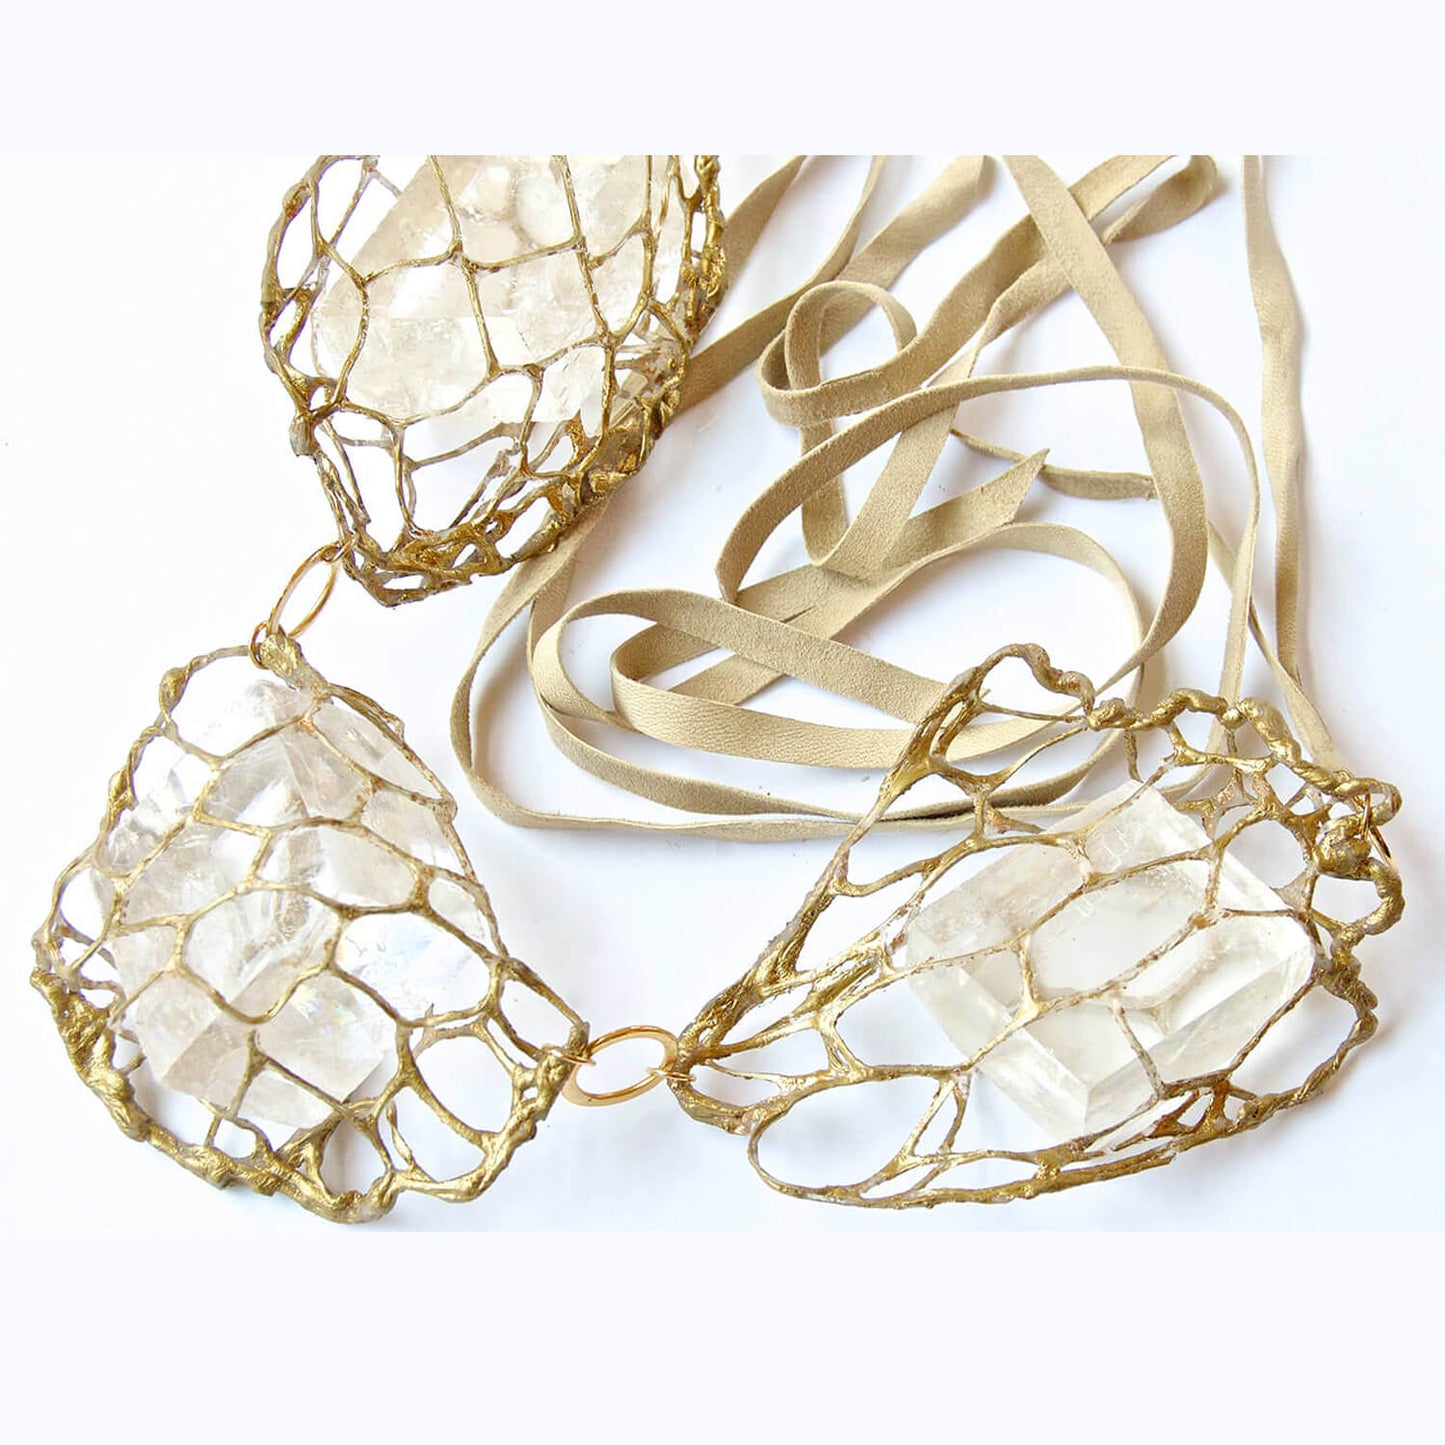 3 Pc Gold Mesh Pods with Clear Icelandic Spar